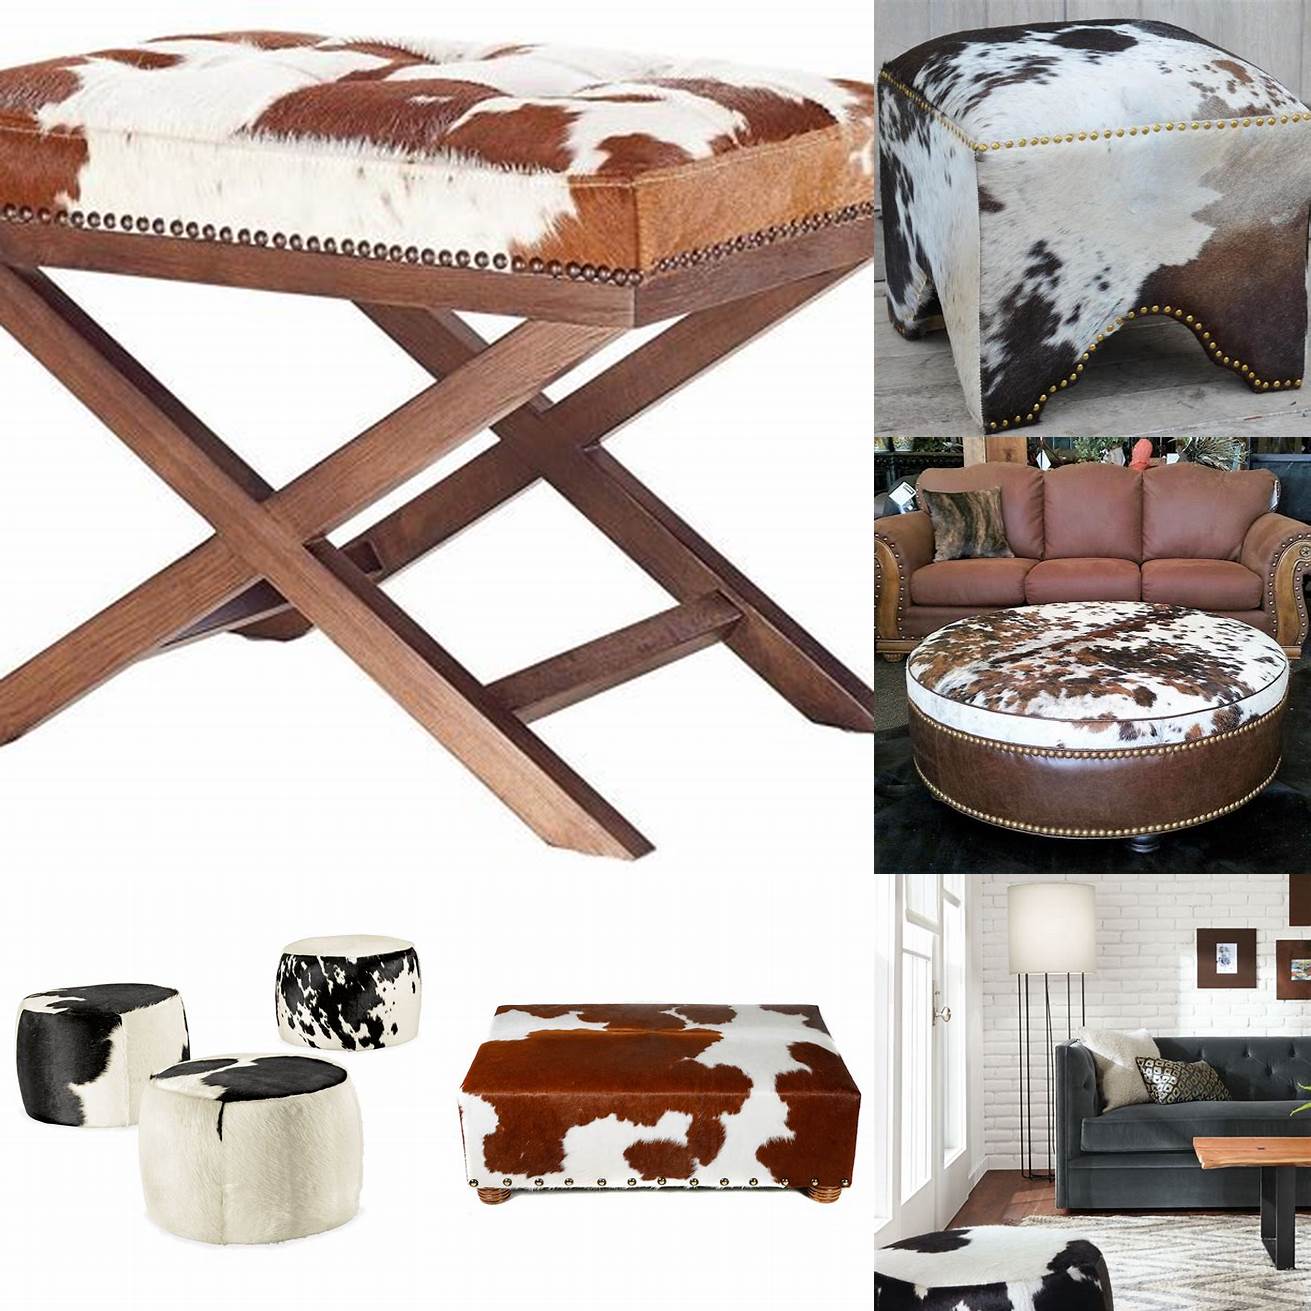 Cowhide ottomans are versatile and can be used as a footrest extra seating or even as a coffee table with the addition of a tray